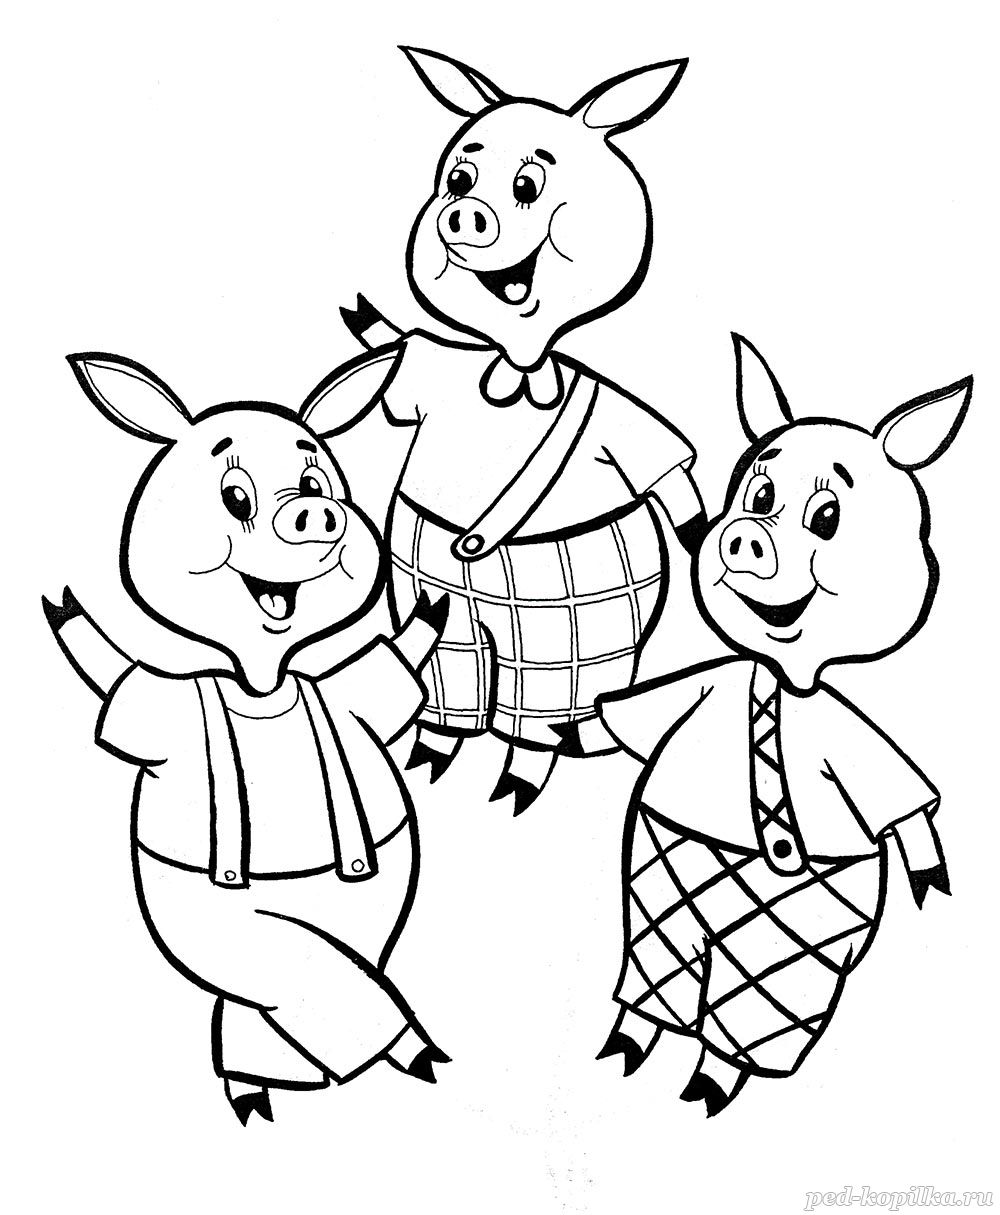 the-three-little-pigs-worksheets-printables-101-activity